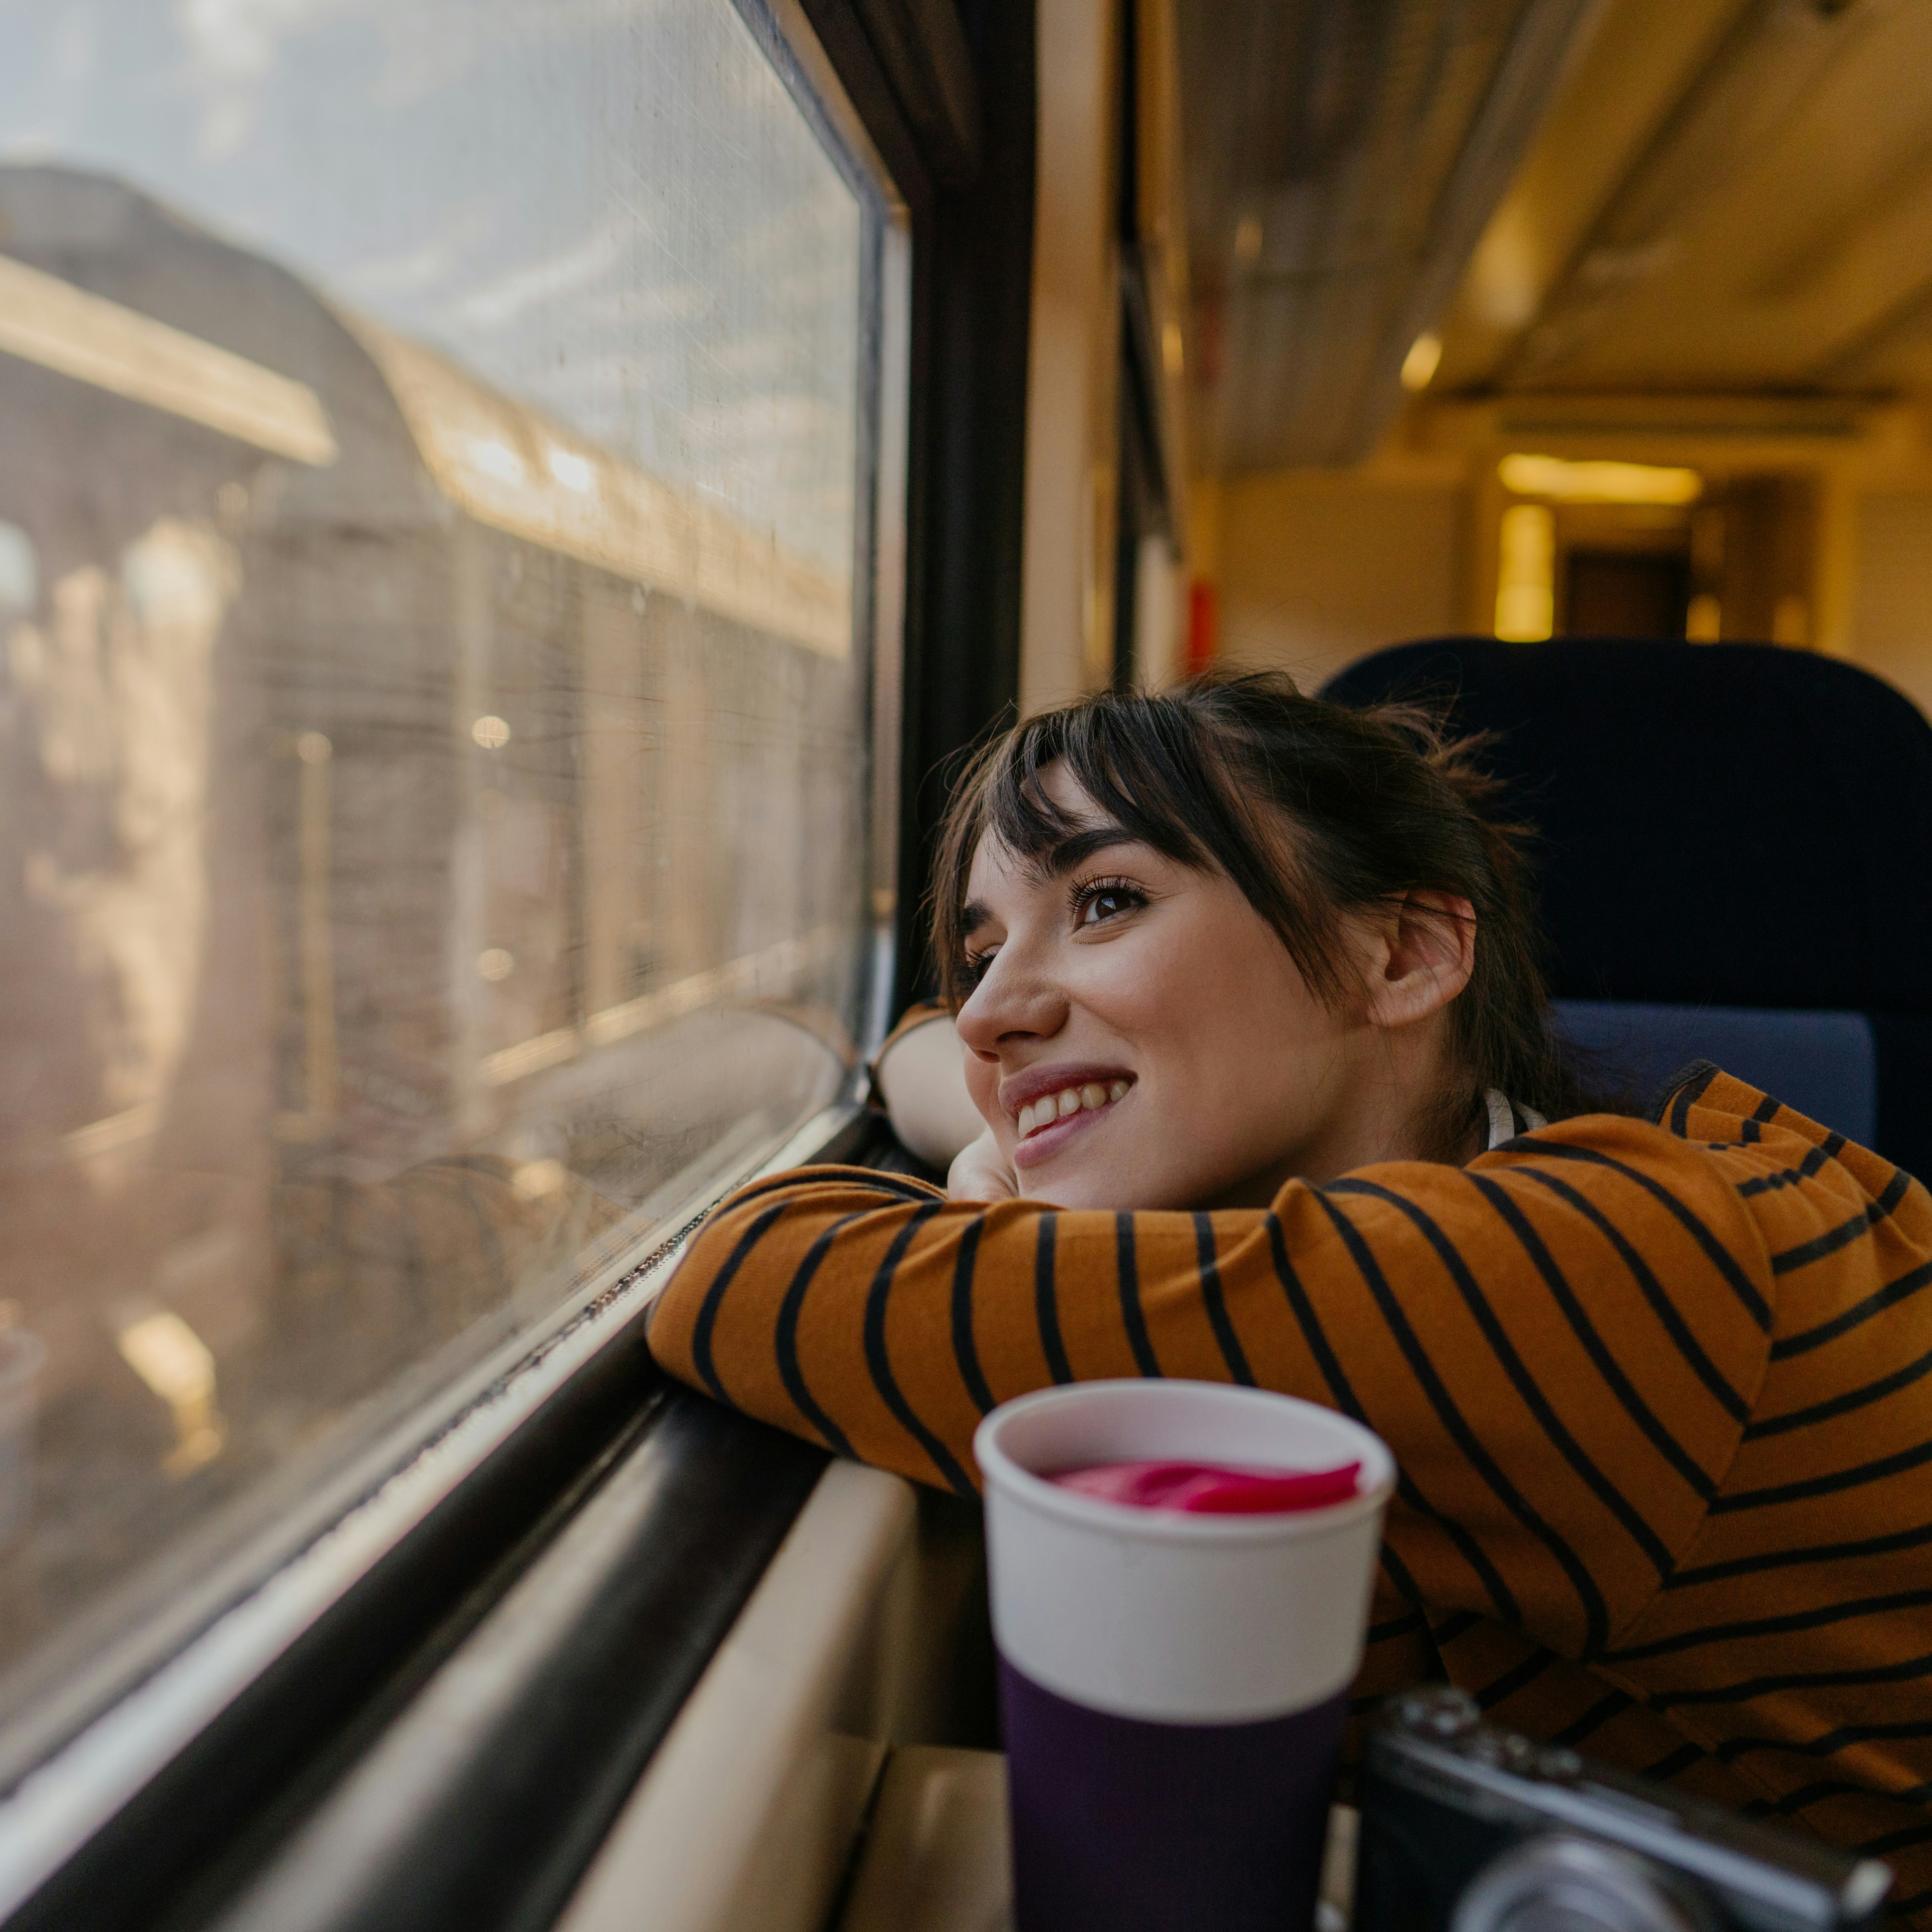 Photo of a young woman riding on a train, enjoying her trip while looking through the window